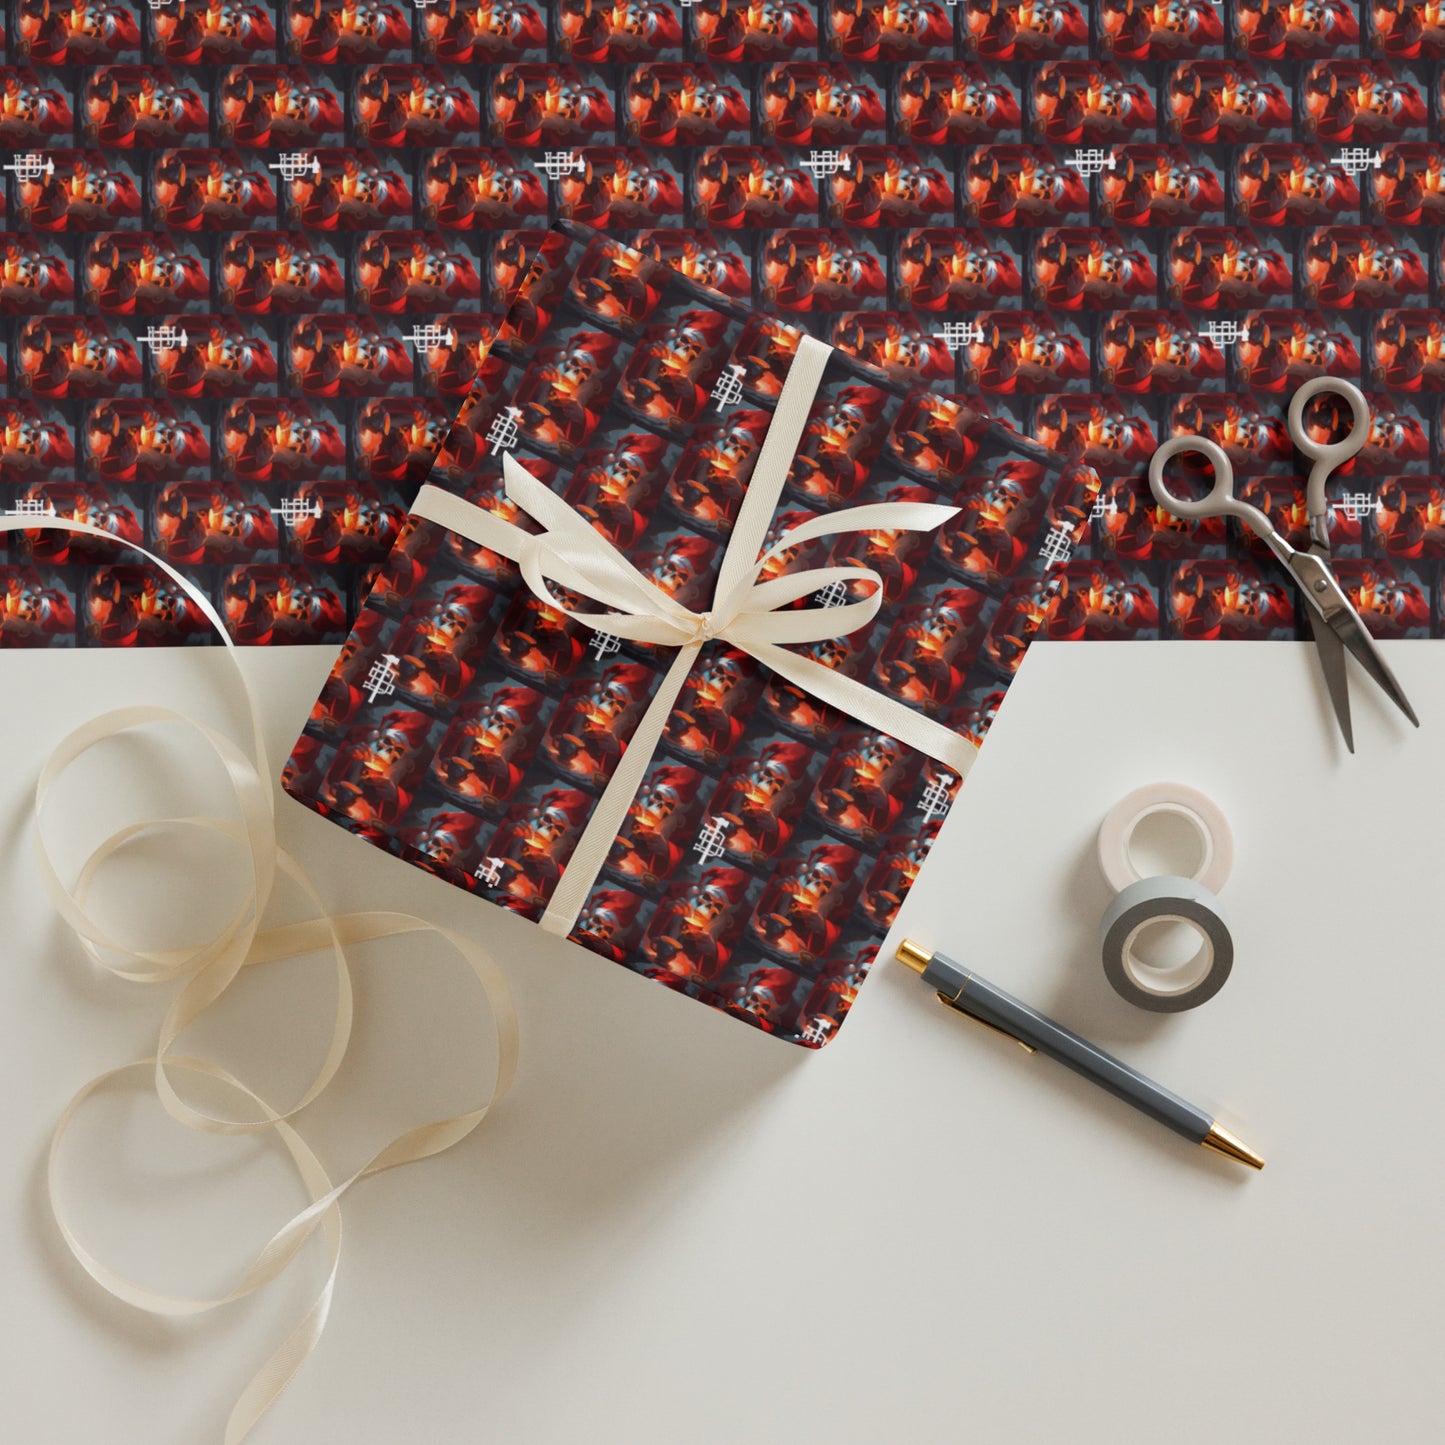 Dirty Smith ® Holiday Wrapping paper sheets